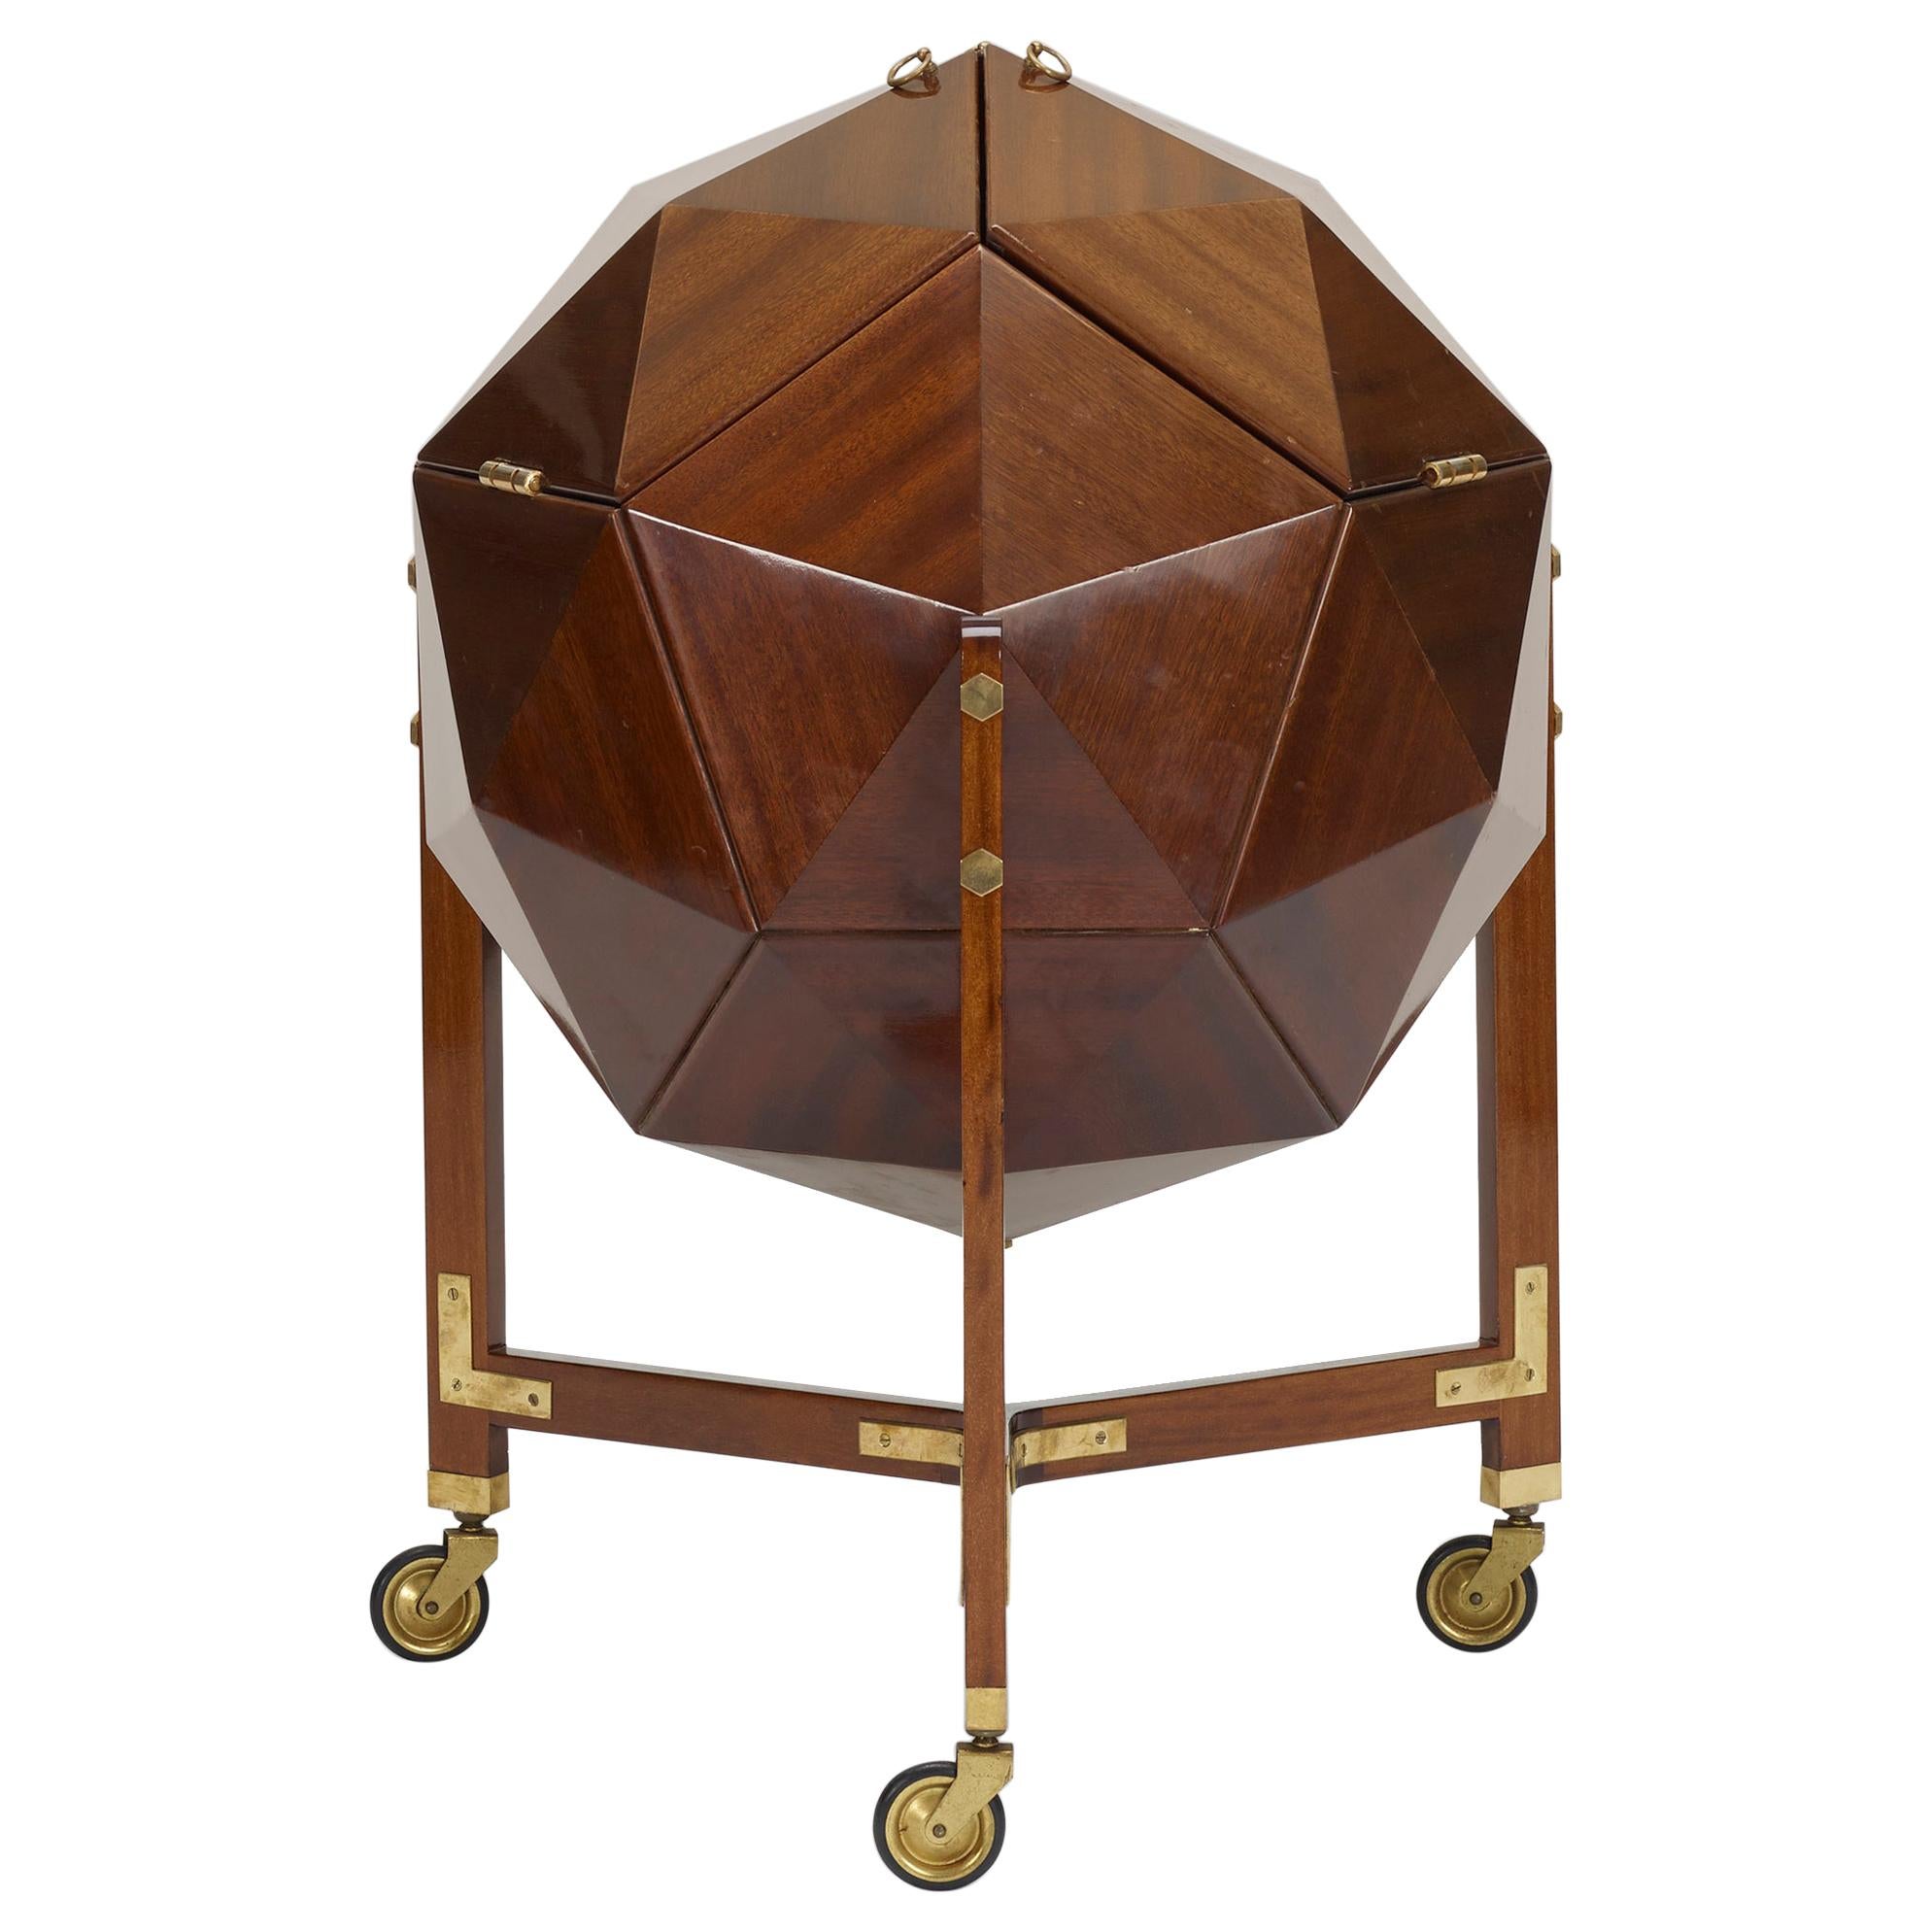 Rare and Unusual Polyhedron Bar Cabinet by Vuillermoz